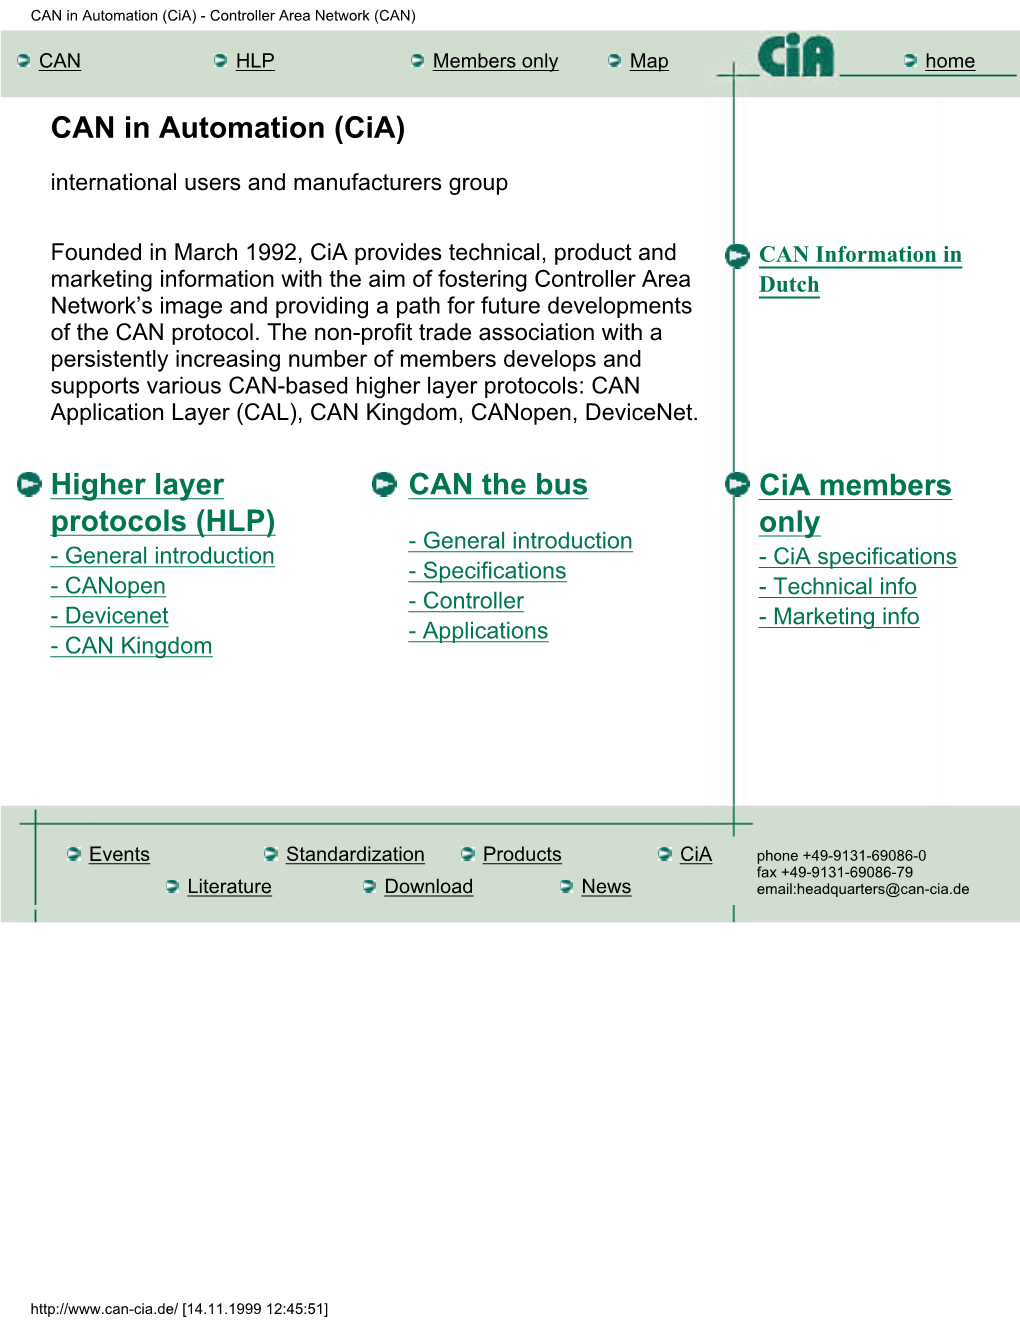 CAN in Automation (Cia) - Controller Area Network (CAN)